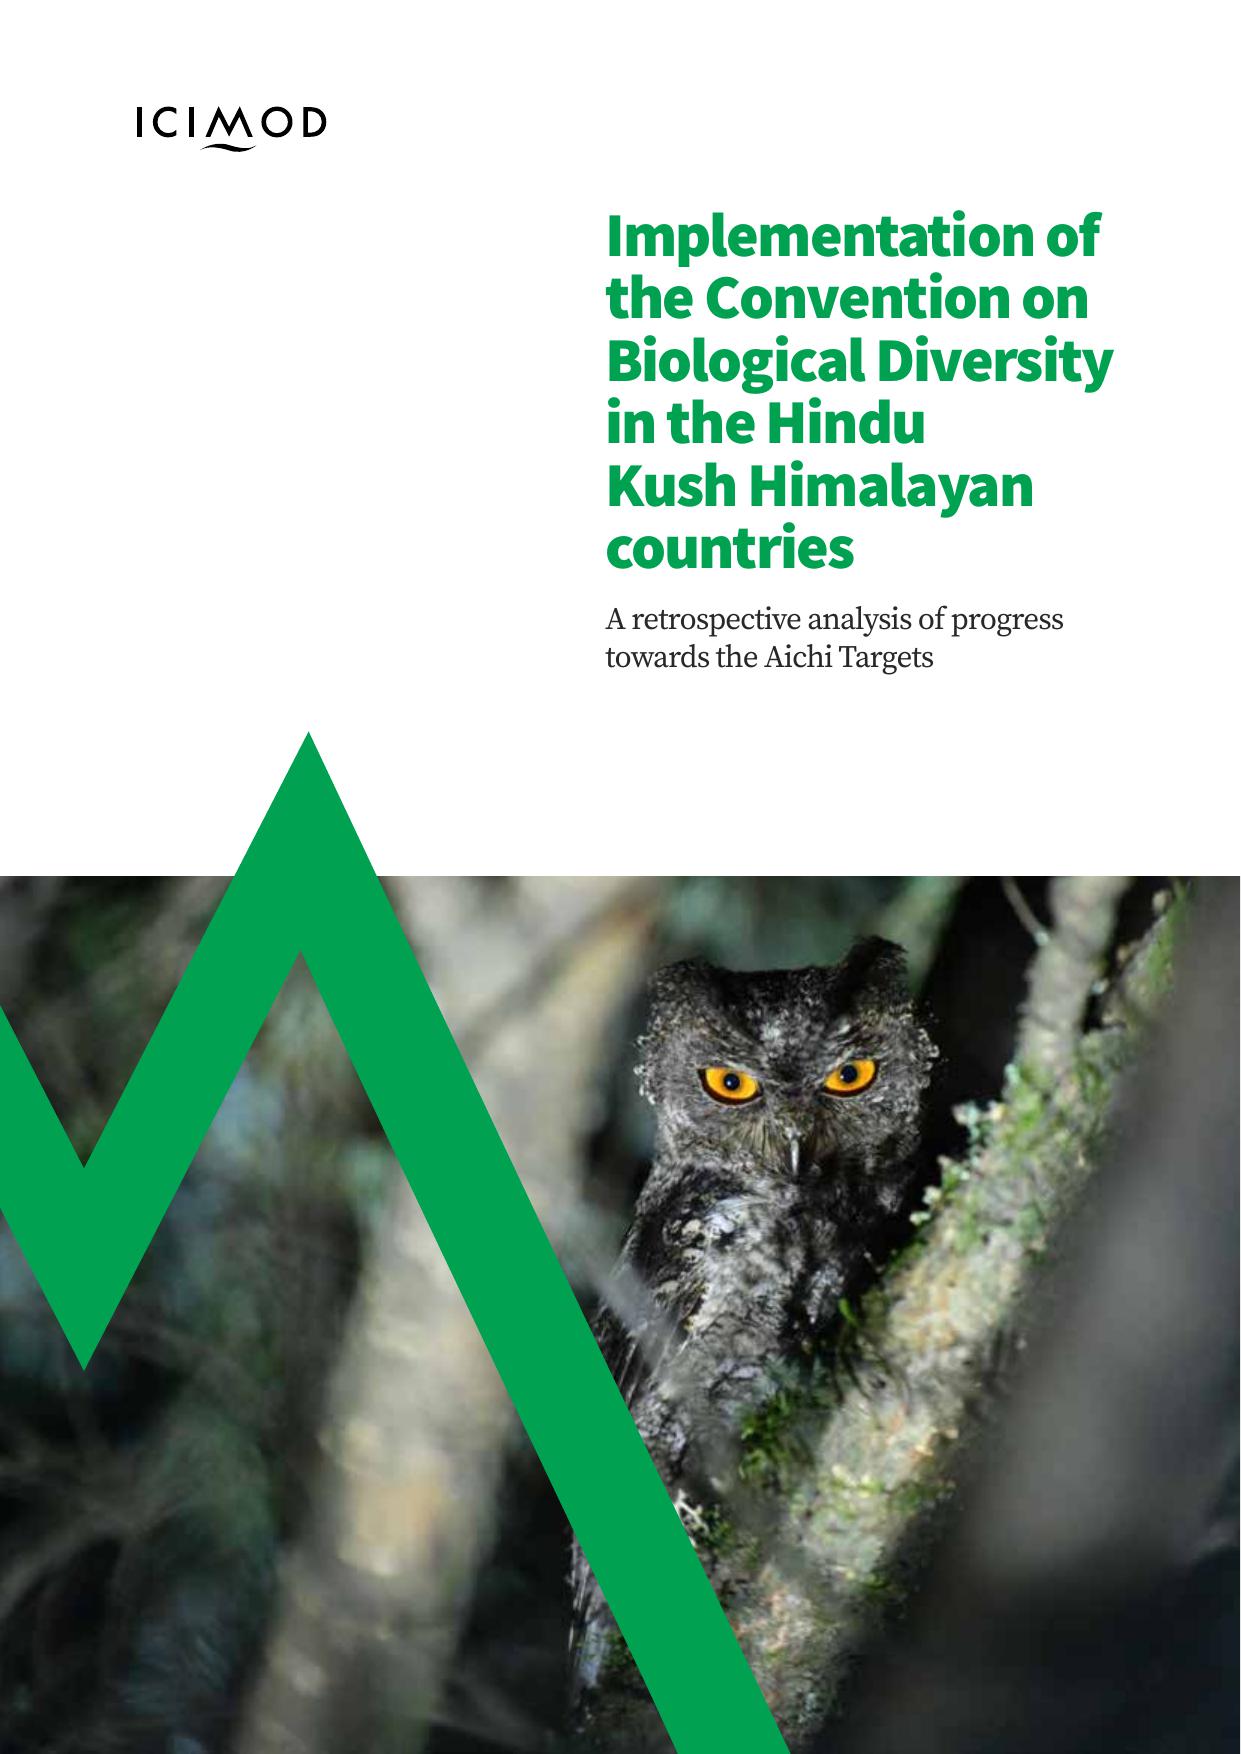 Implementation of the Convention on Biological Diversity in the Hindu Kush Himalayan countries: A retrospective analysis of Aichi Targets